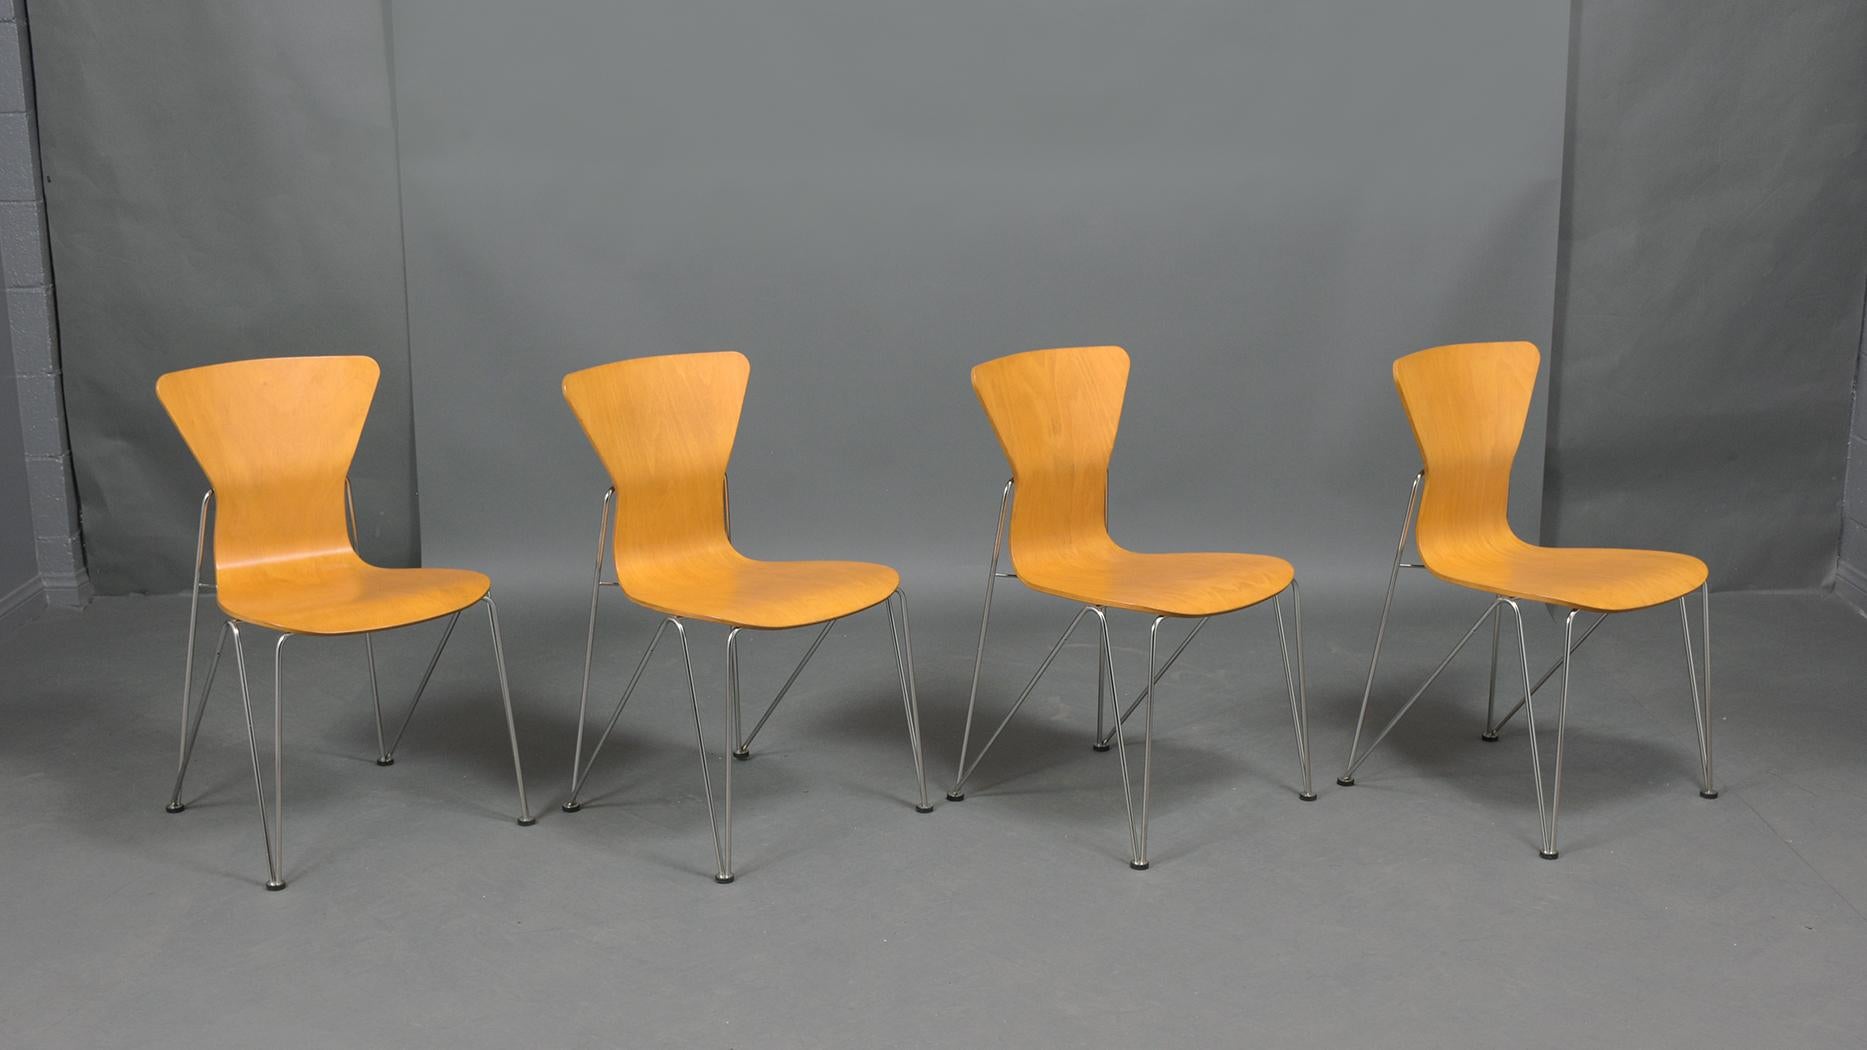 An extraordinary set of four mid-century molded plywood chairs beautifully crafted and newly professionally restored by our craftsmen. This fabulous set is in great condition has been newly stained in a maple color with a lacquered finish. This